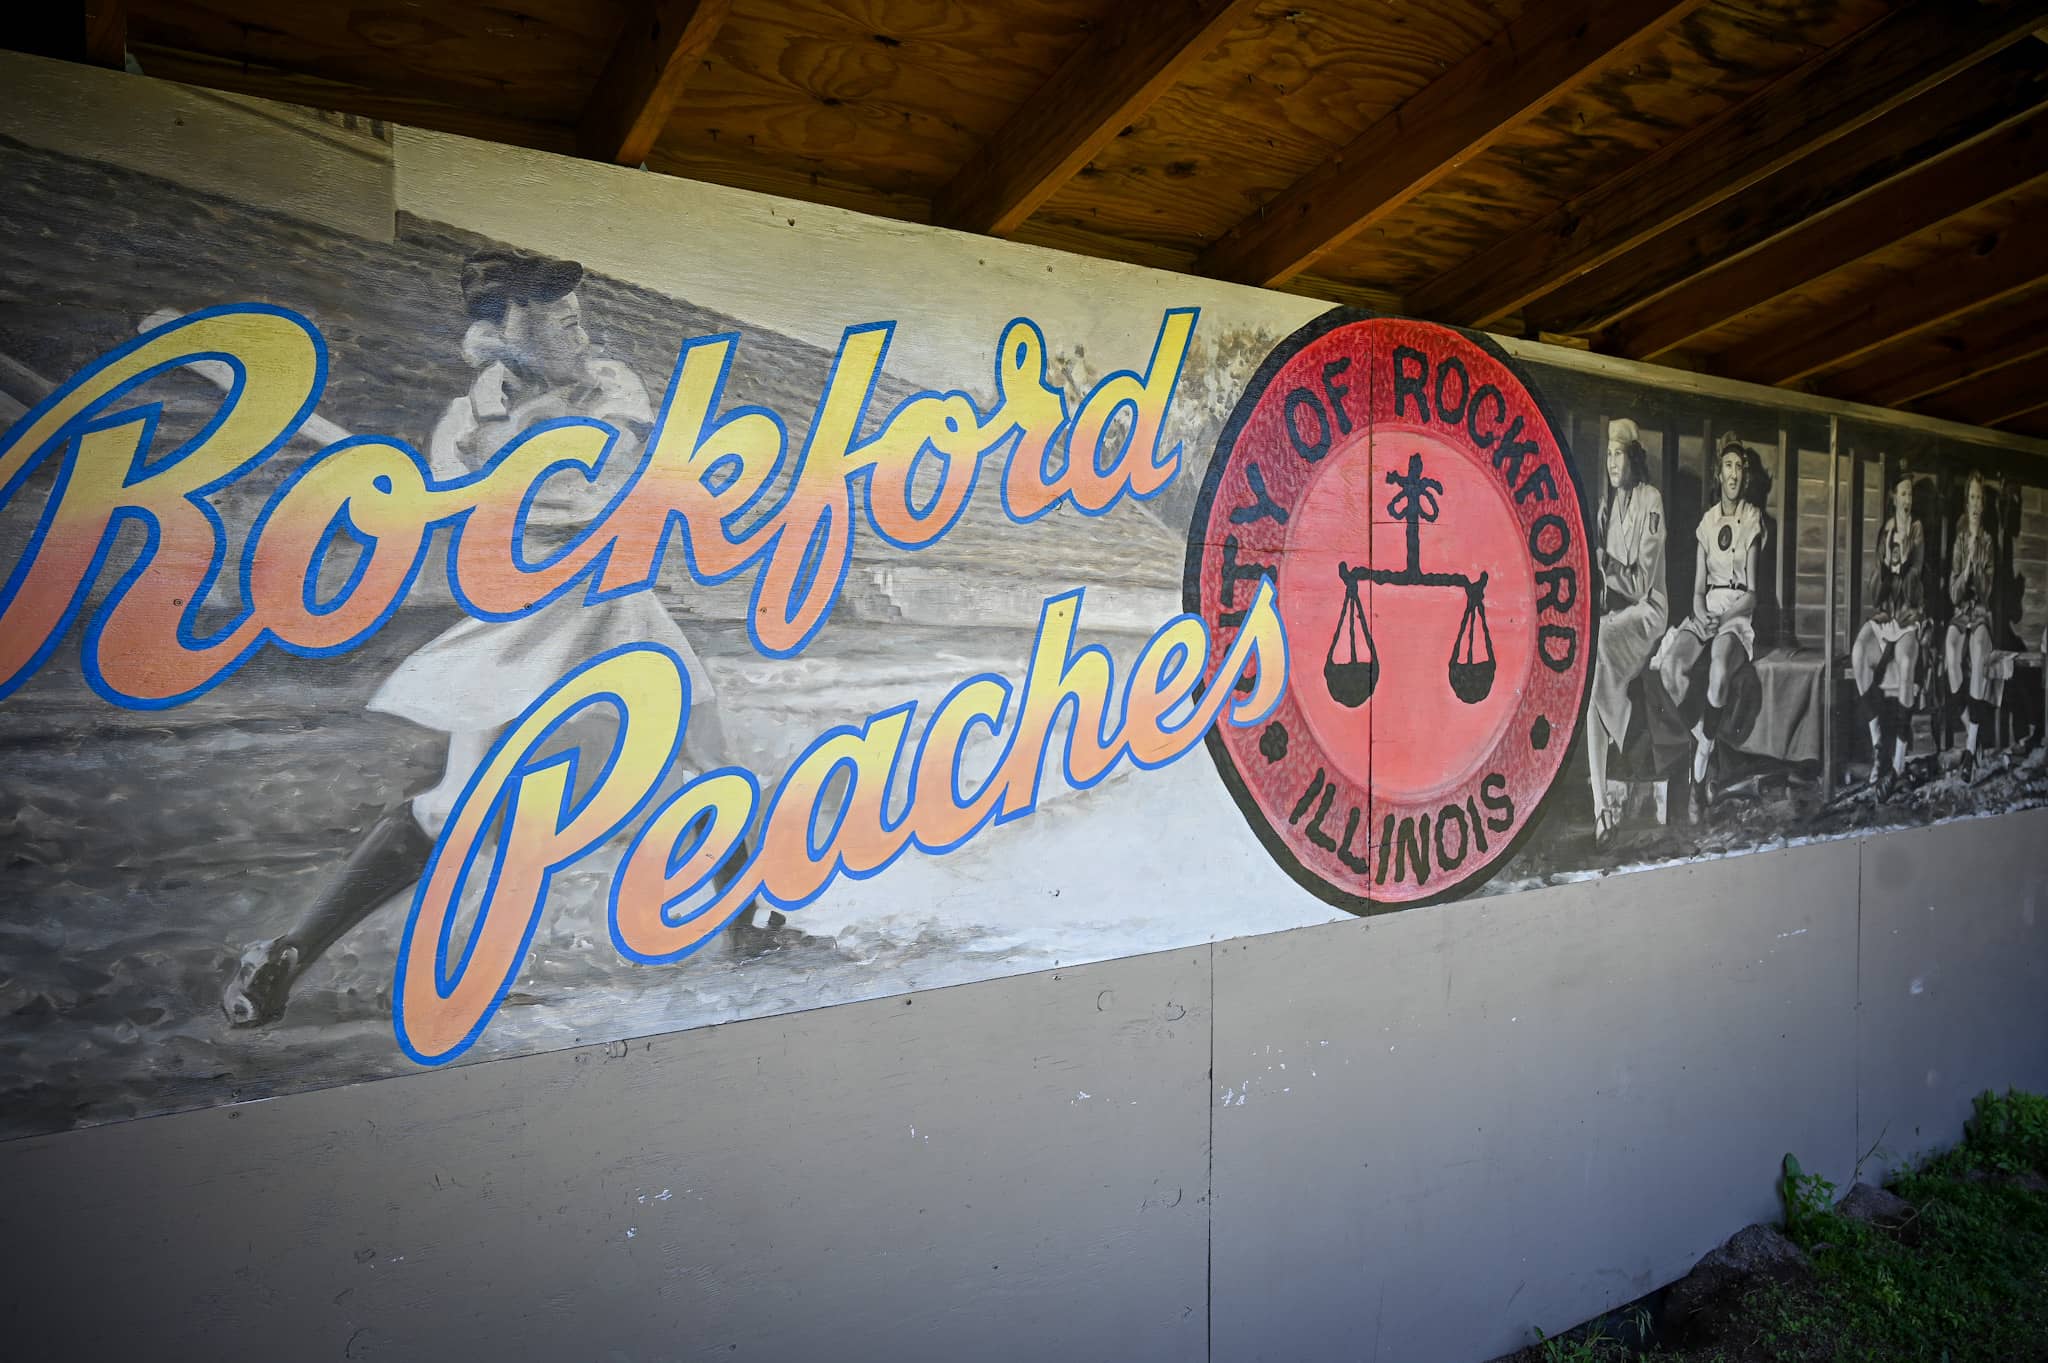 I think Rockford will be proud': New  series shows different side of Rockford  Peaches